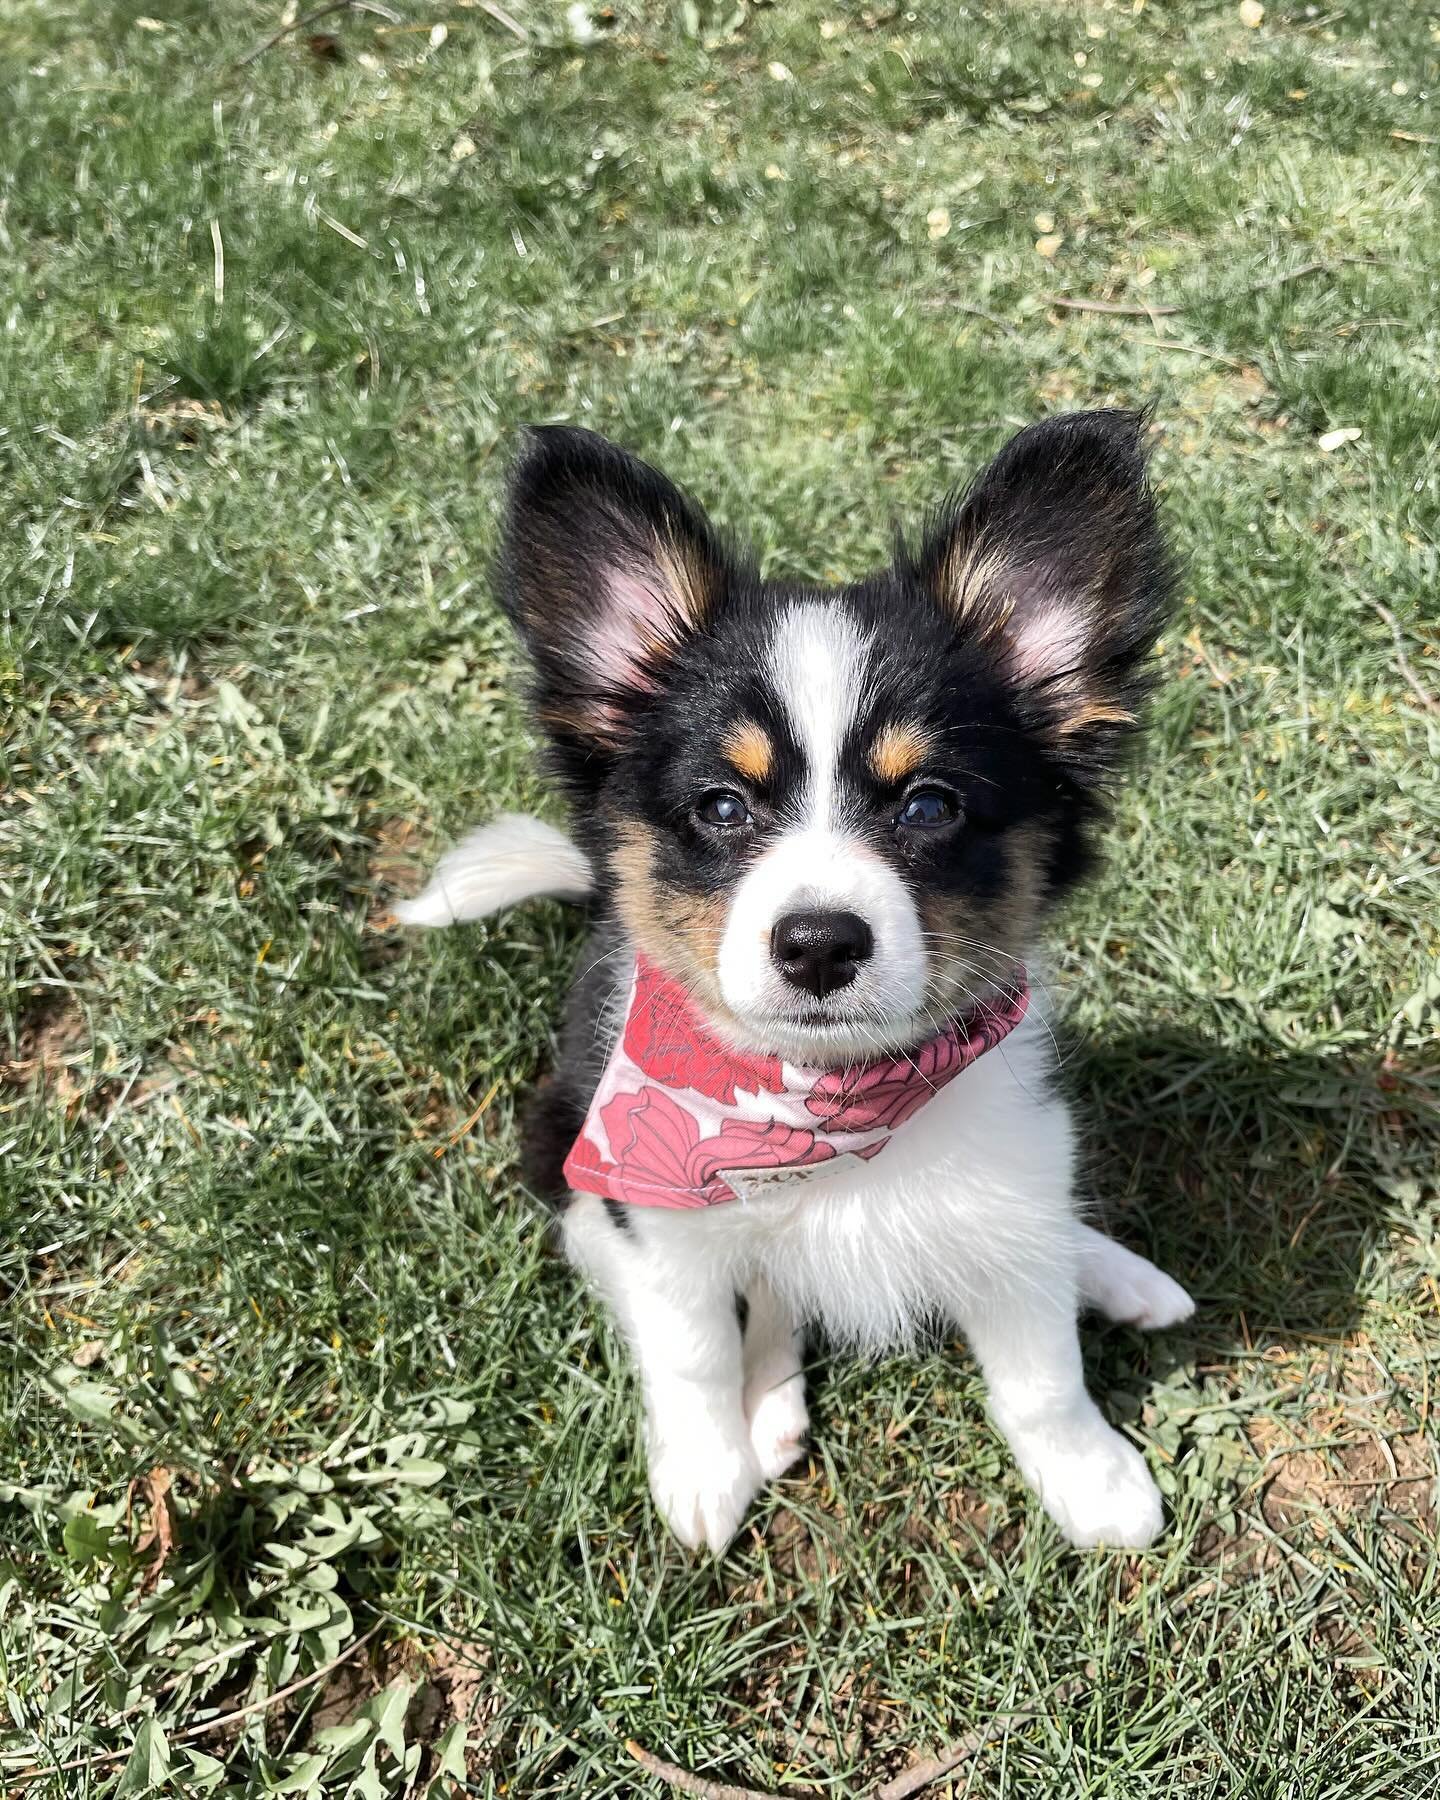 Happy national pet day to our newest little love - Poppy &hearts;️ we&rsquo;re so excited to have her join the family and be the newest model for Cocopups 🥹🥰

Poppy is a mini-Aussie x Papillon cross. She doesn&rsquo;t like the kitchen, obsessed wit